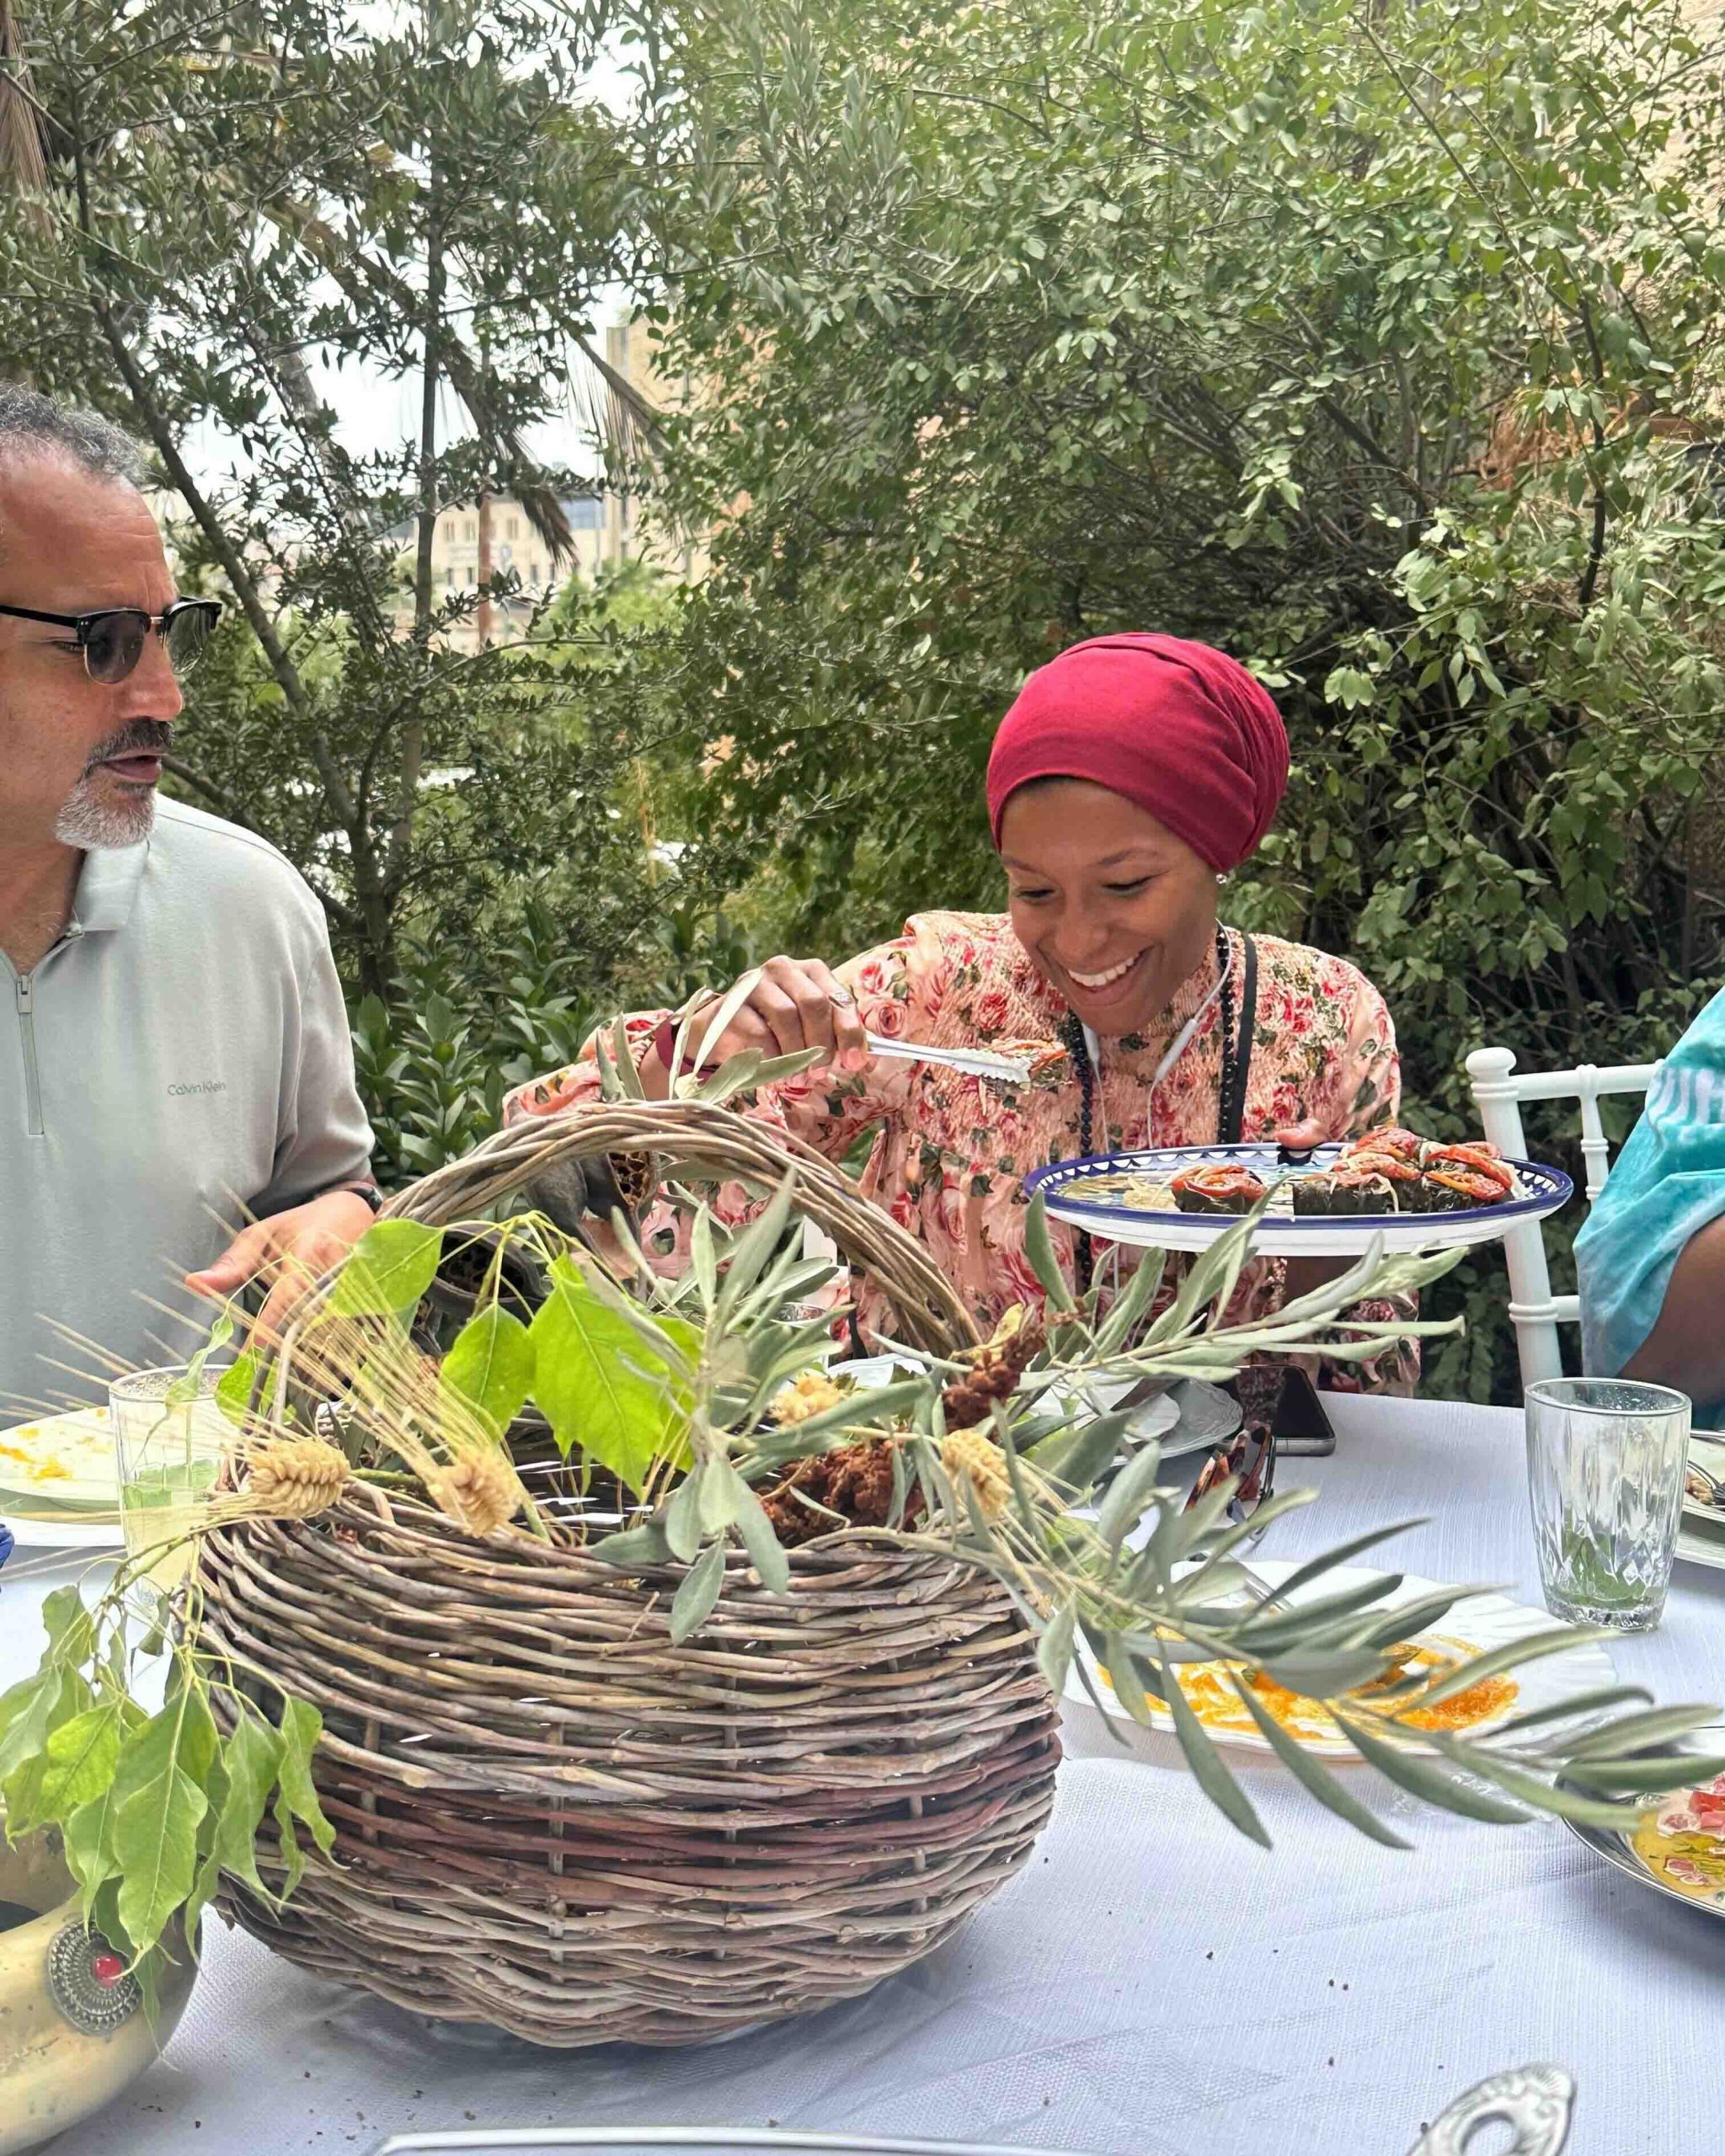 A photo of a woman sitting at a table as a part of a larger group, holding a plate and serving herself Palestinian food.